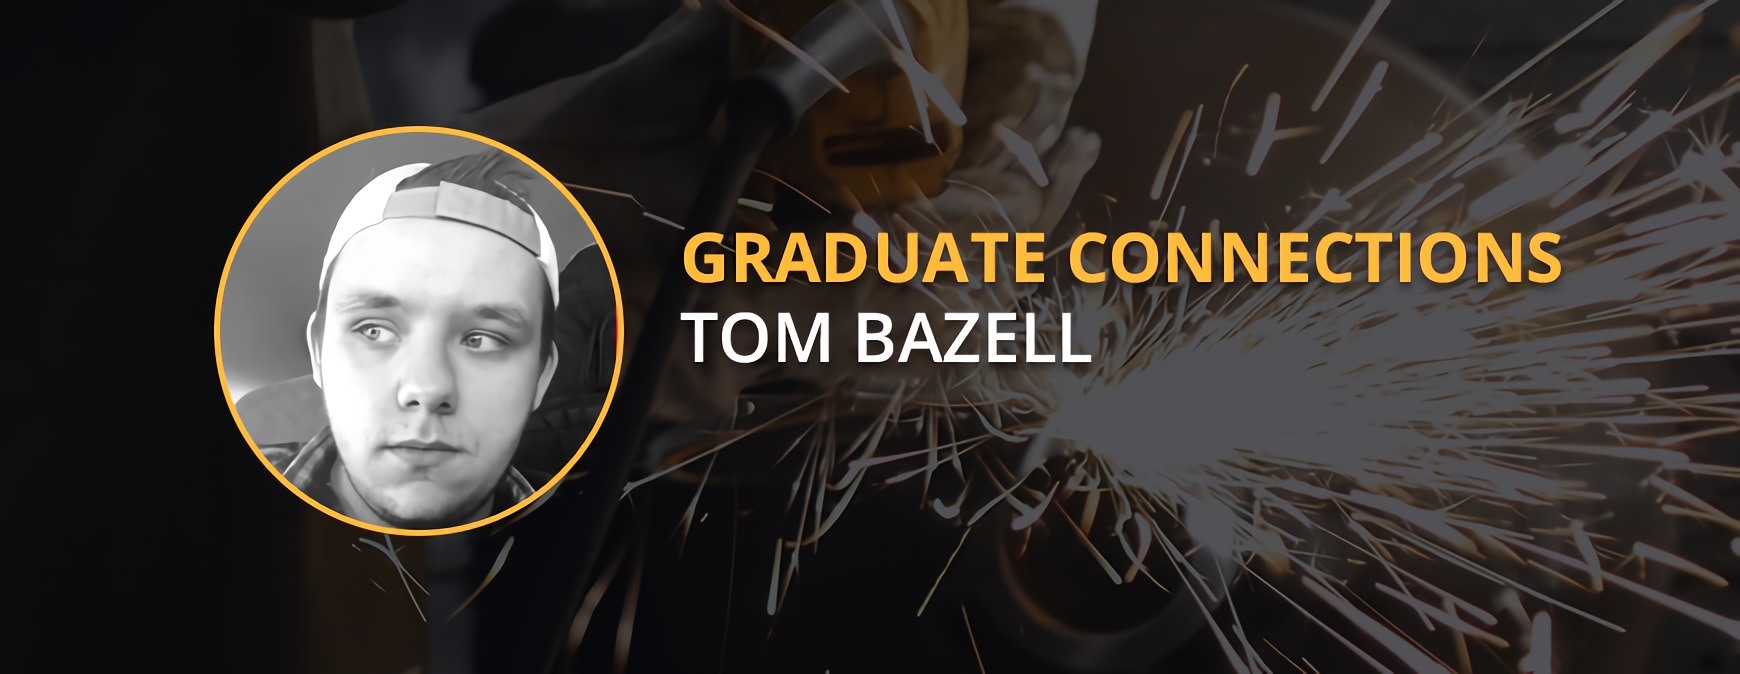 Tom Bazell Graduate Connection